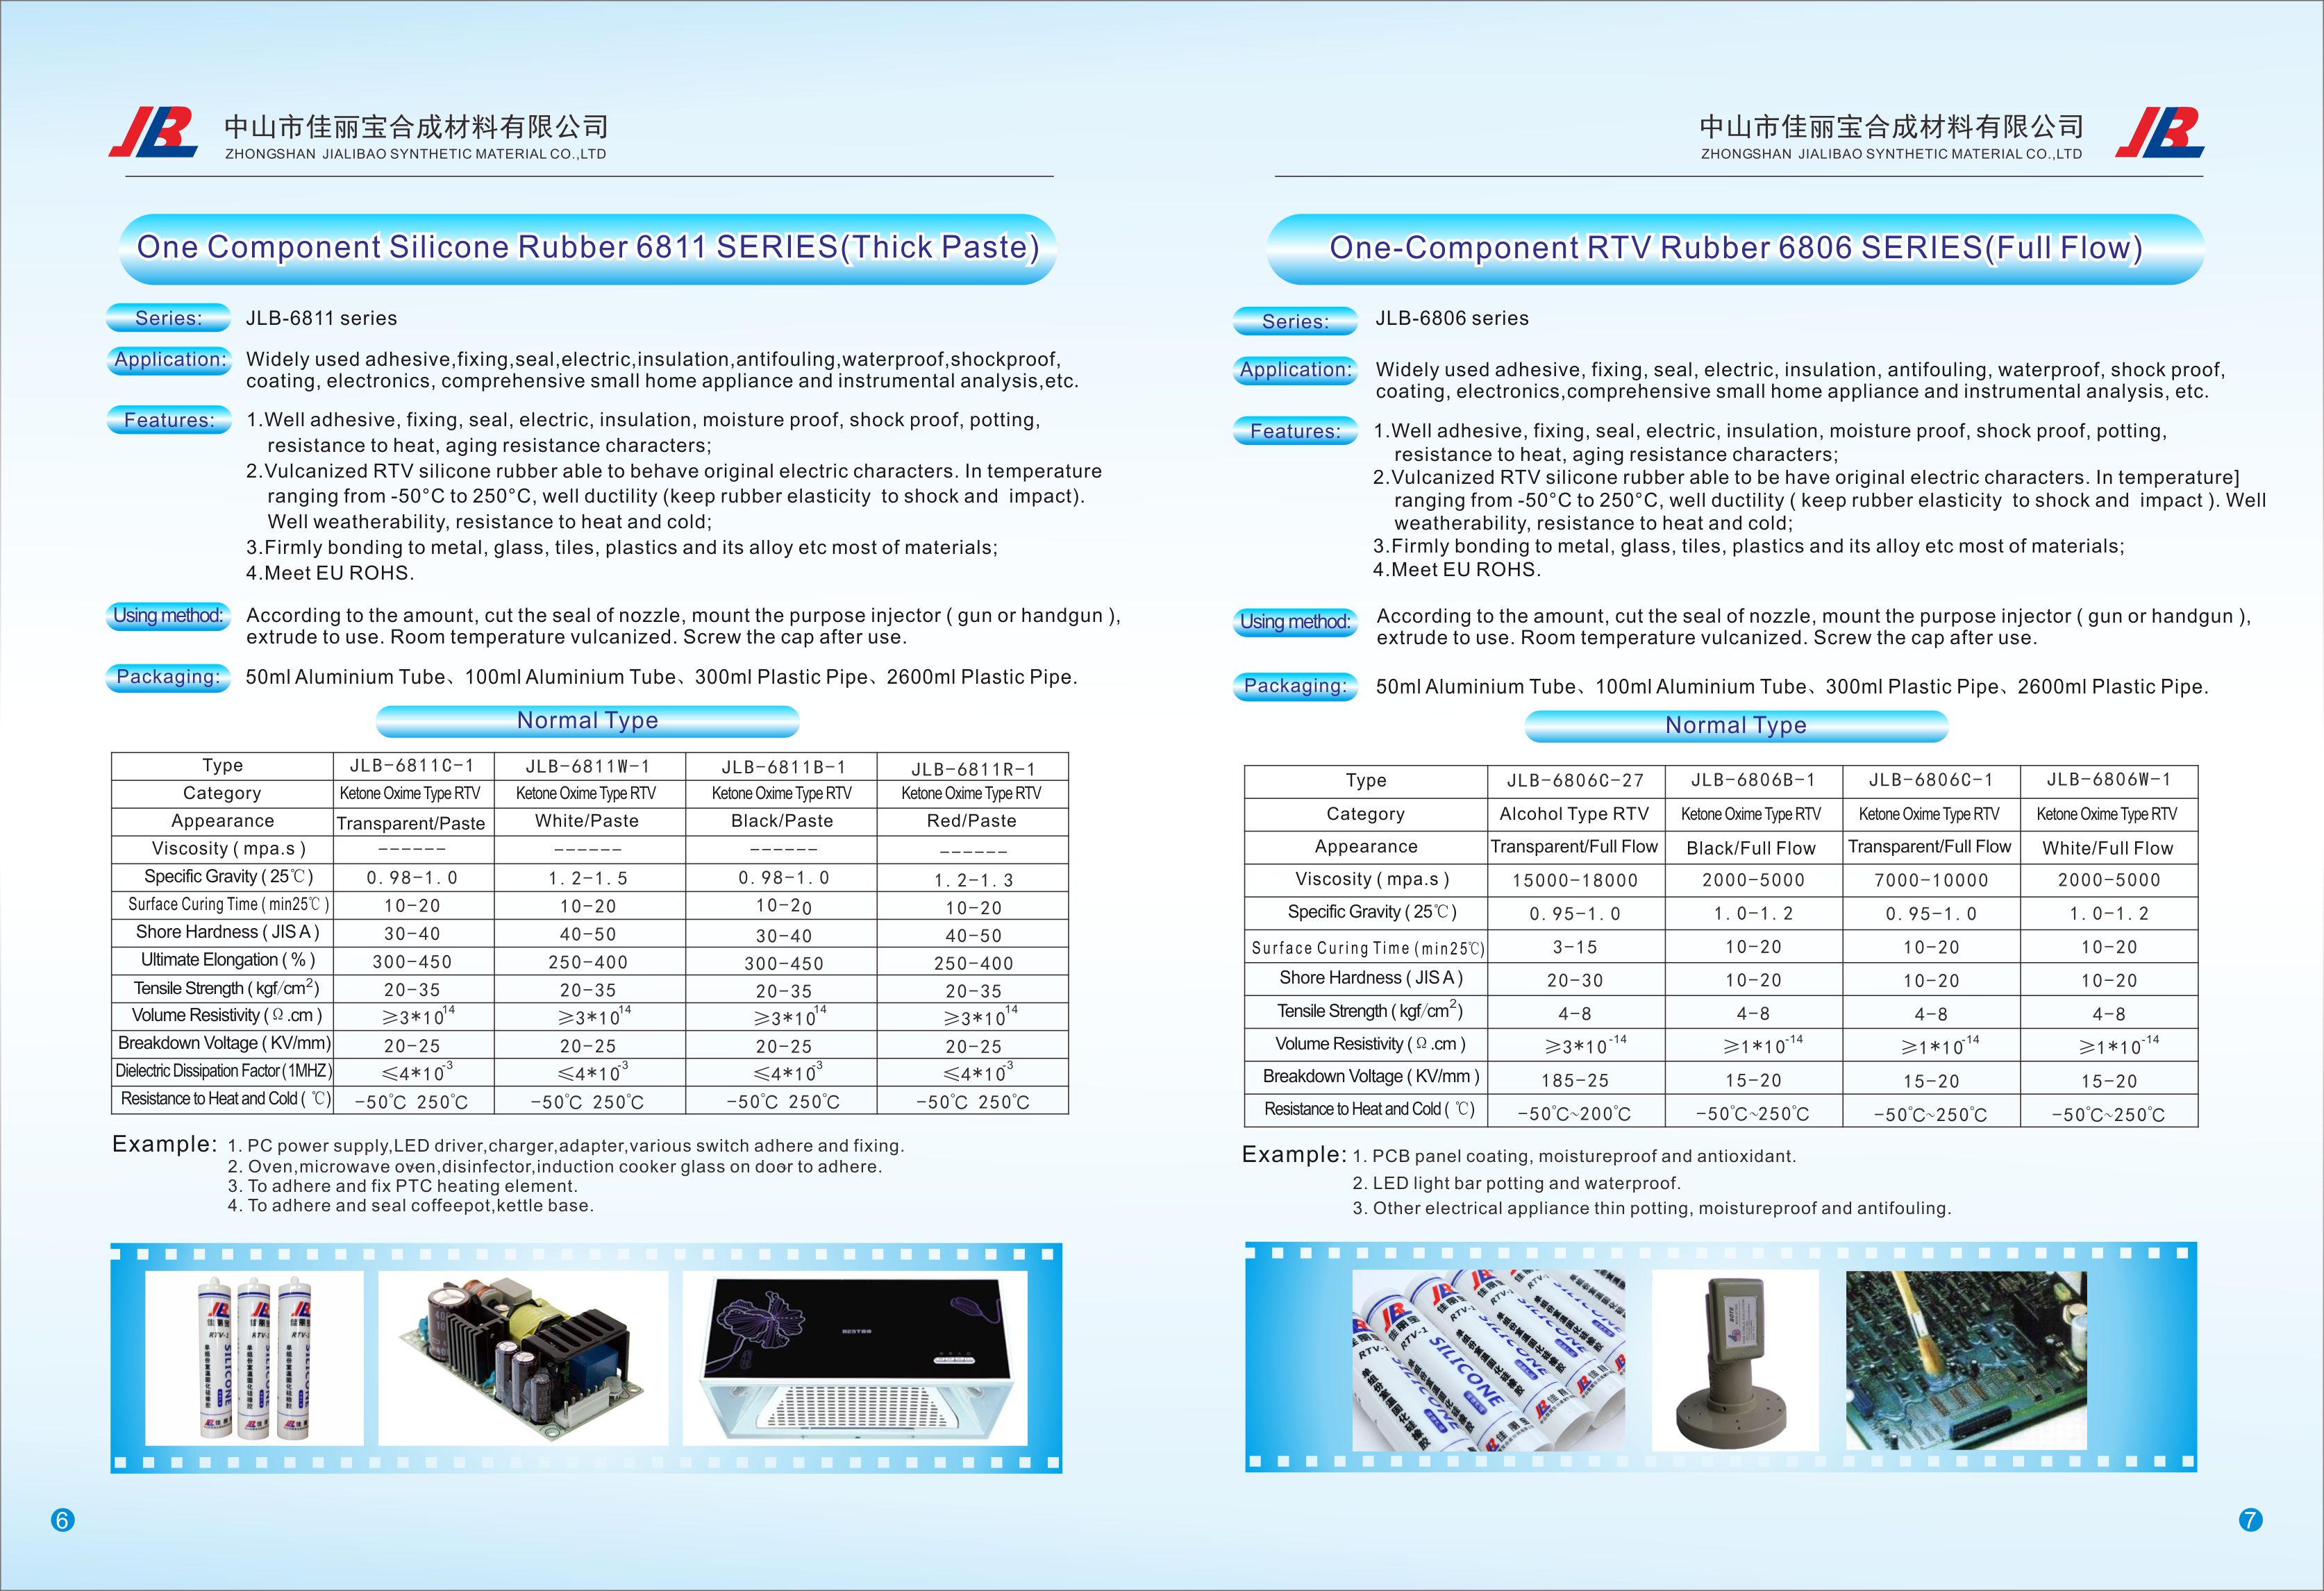 One Component Silicone Rubber 606 Series